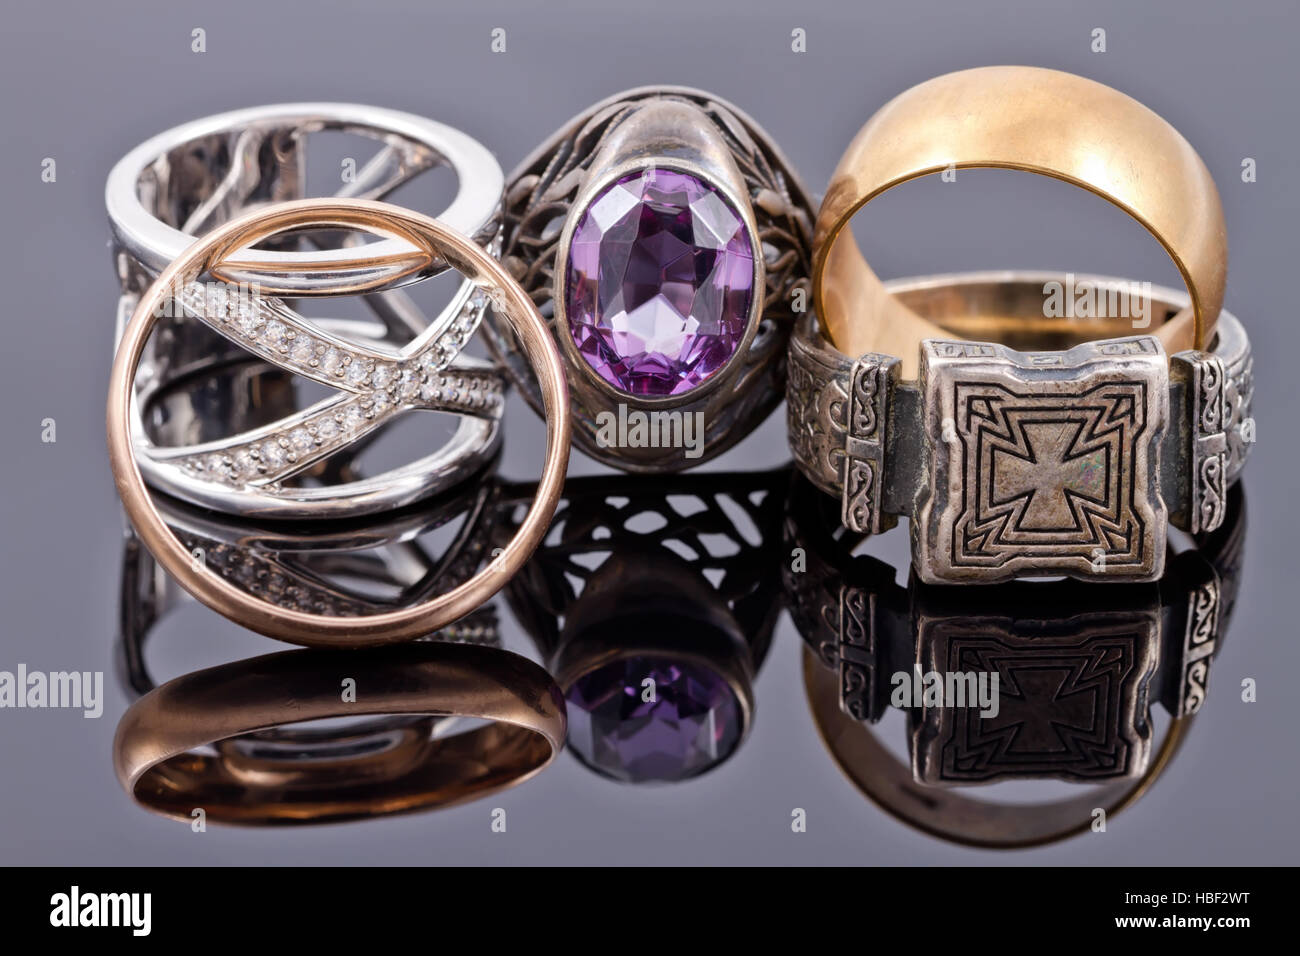 Gold and silver jewelry Stock Photo